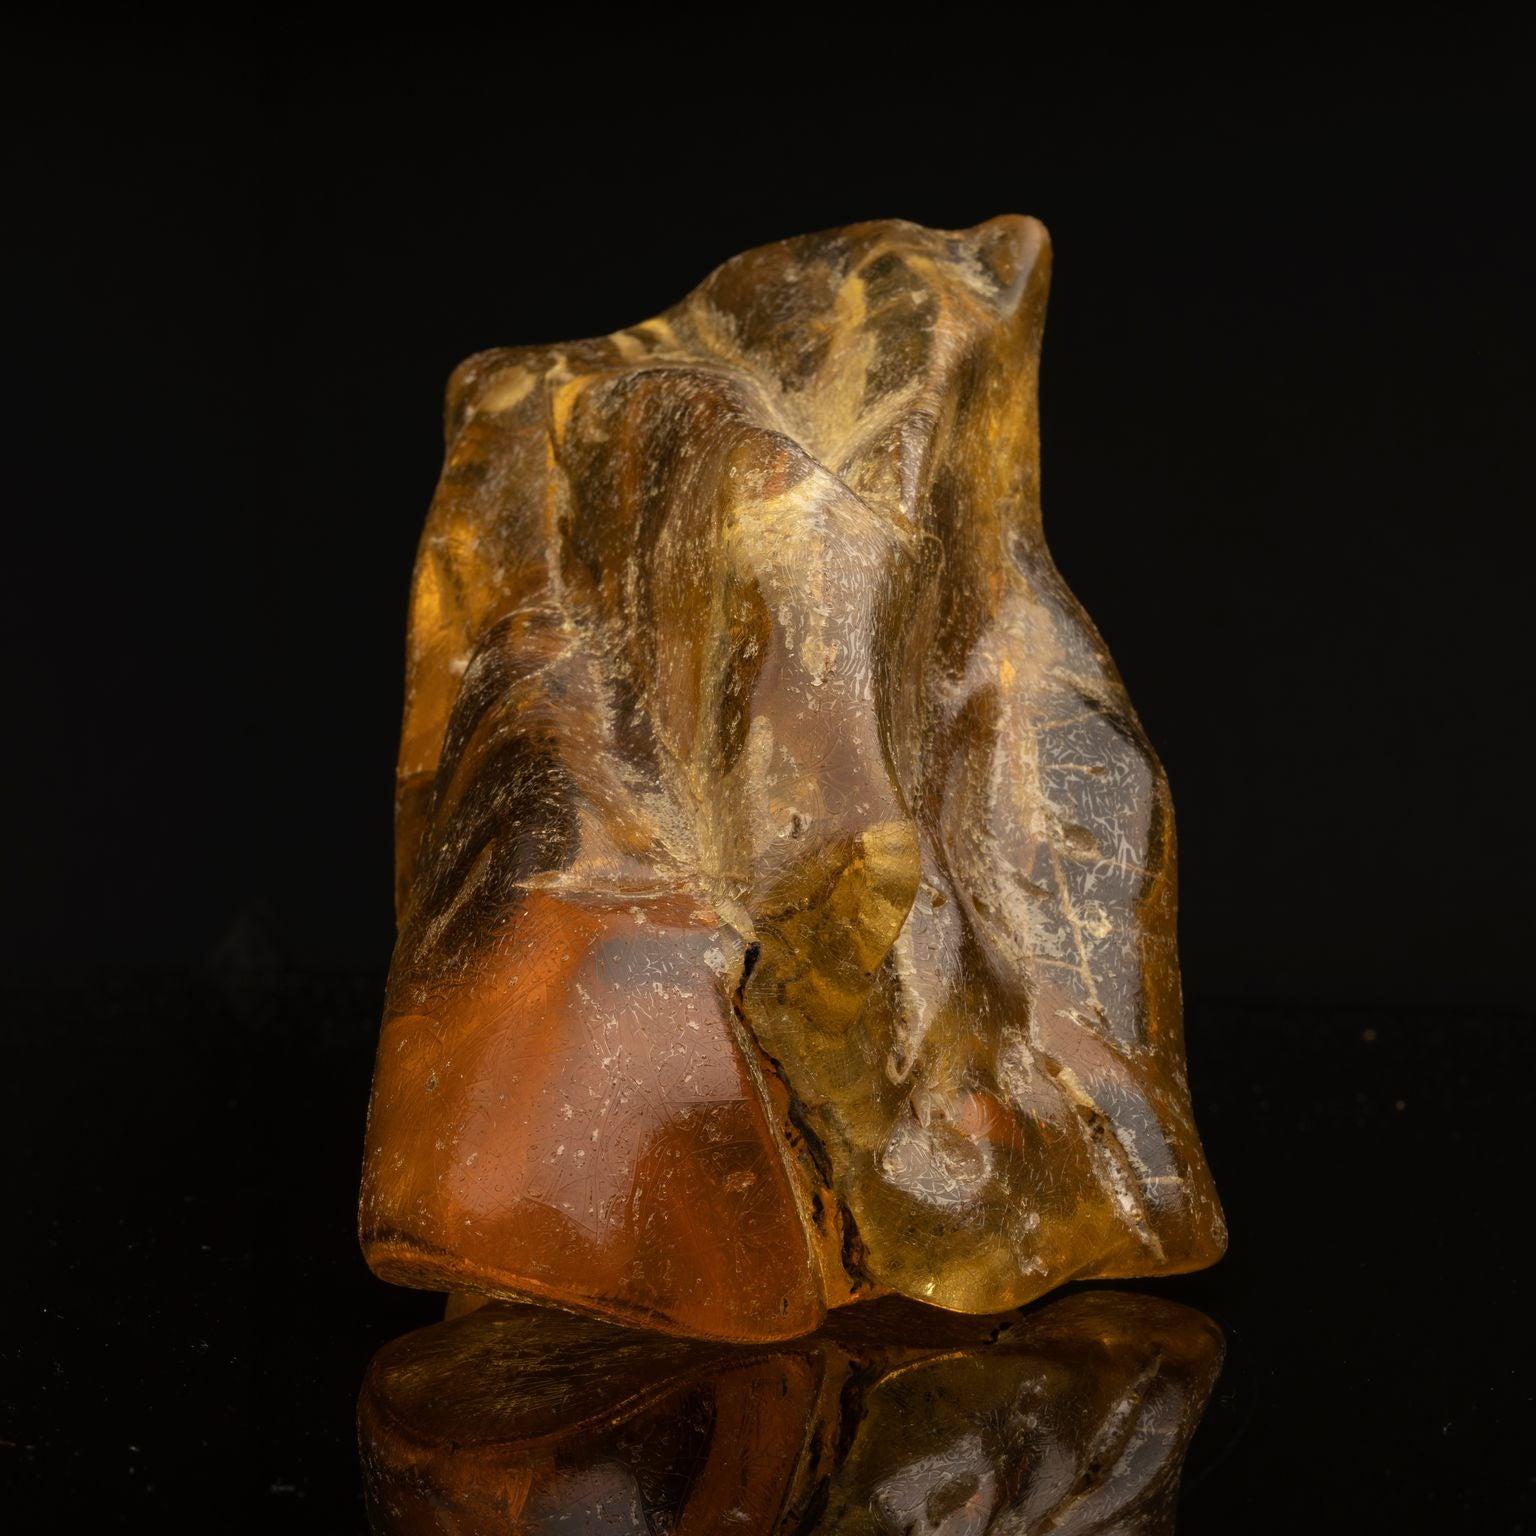 This large, translucent piece of amber is from the Dominican Republic and is an estimated 16 to 25 million years old. Amber is fossilized tree resin and is considered a mineraloid. This specimen contains a plethora of preserved plant